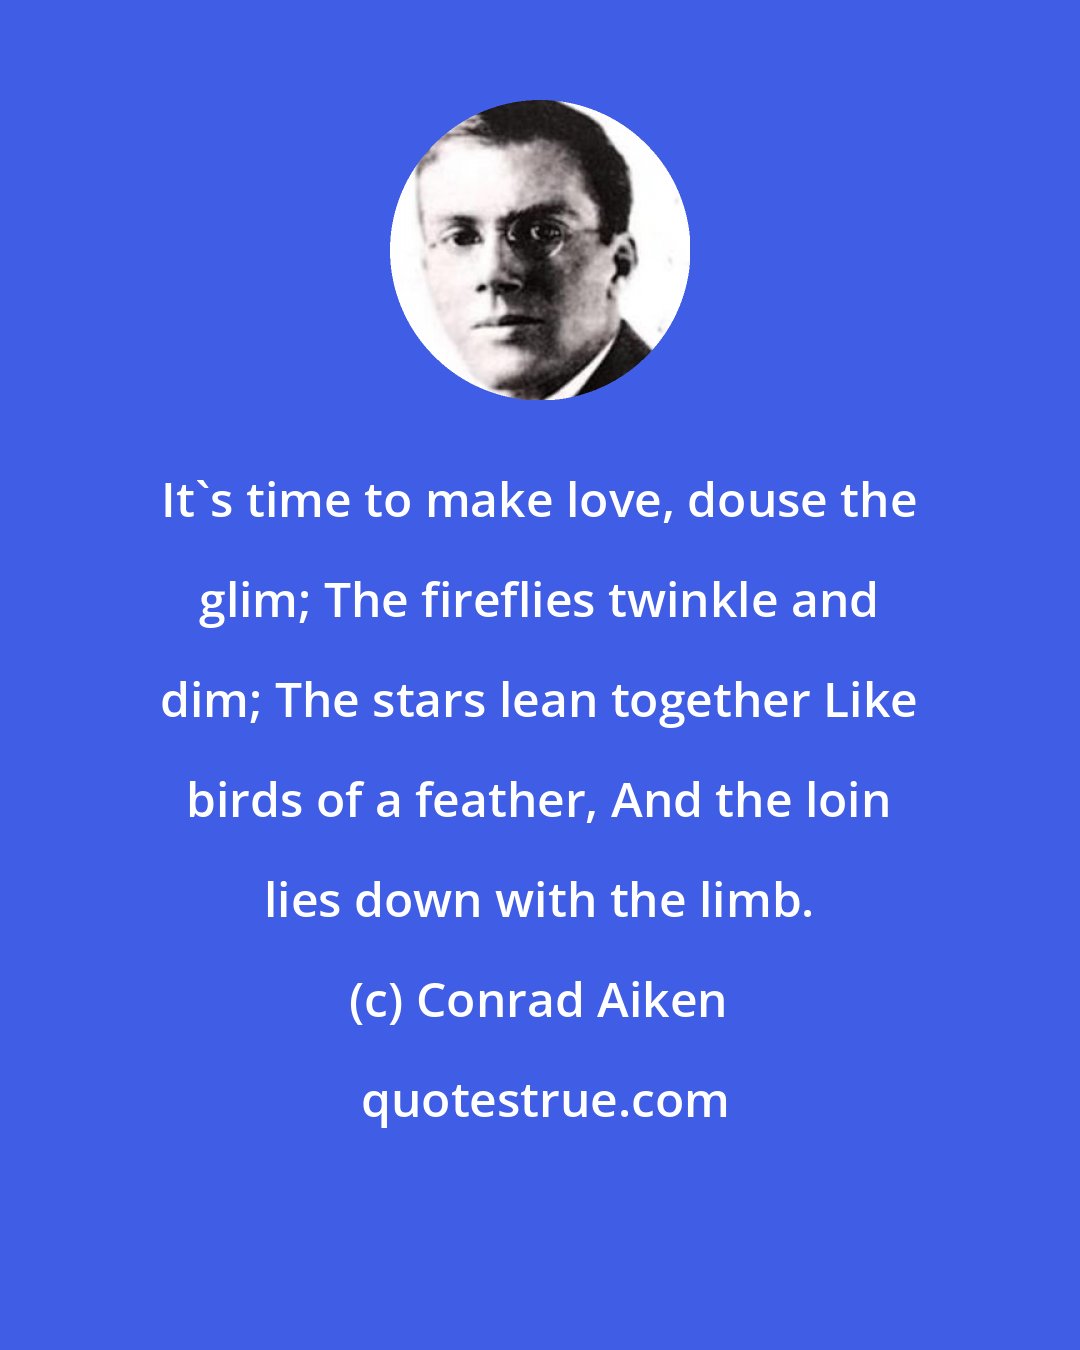 Conrad Aiken: It's time to make love, douse the glim; The fireflies twinkle and dim; The stars lean together Like birds of a feather, And the loin lies down with the limb.